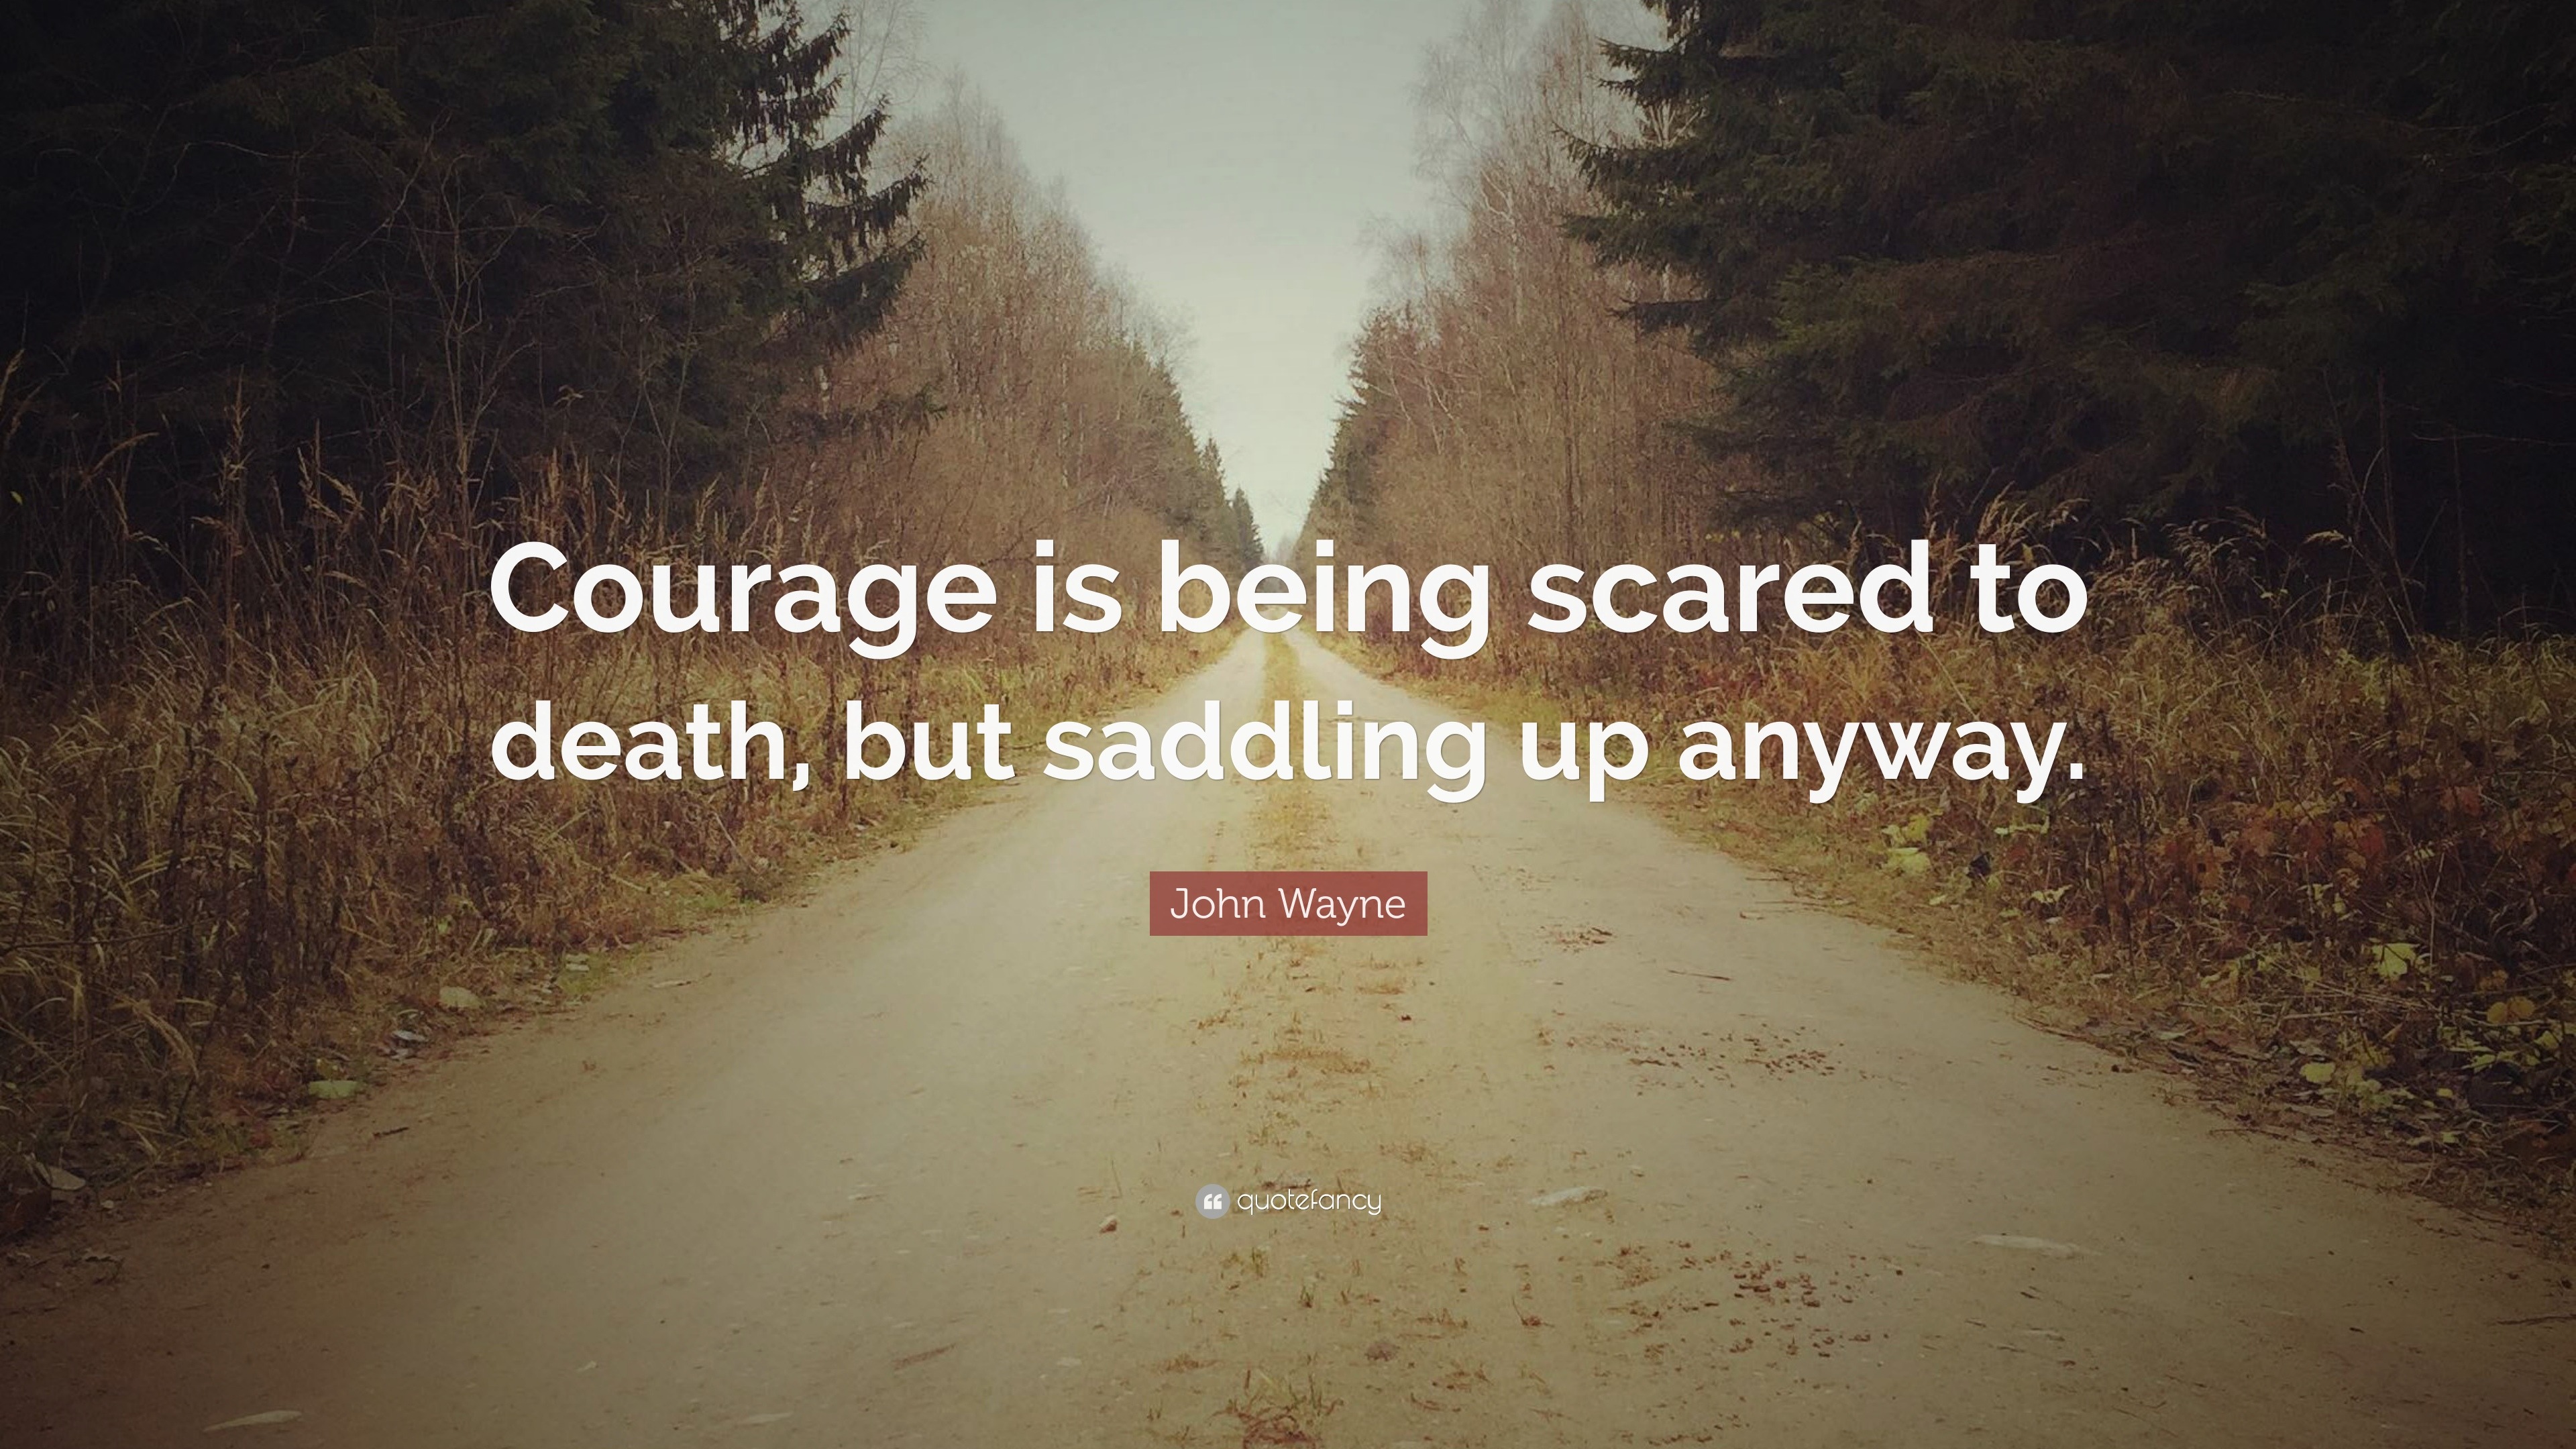 Courage is being scared to death, but saddling up anyway. - John Wayne  Quote 126 - Ave Mateiu